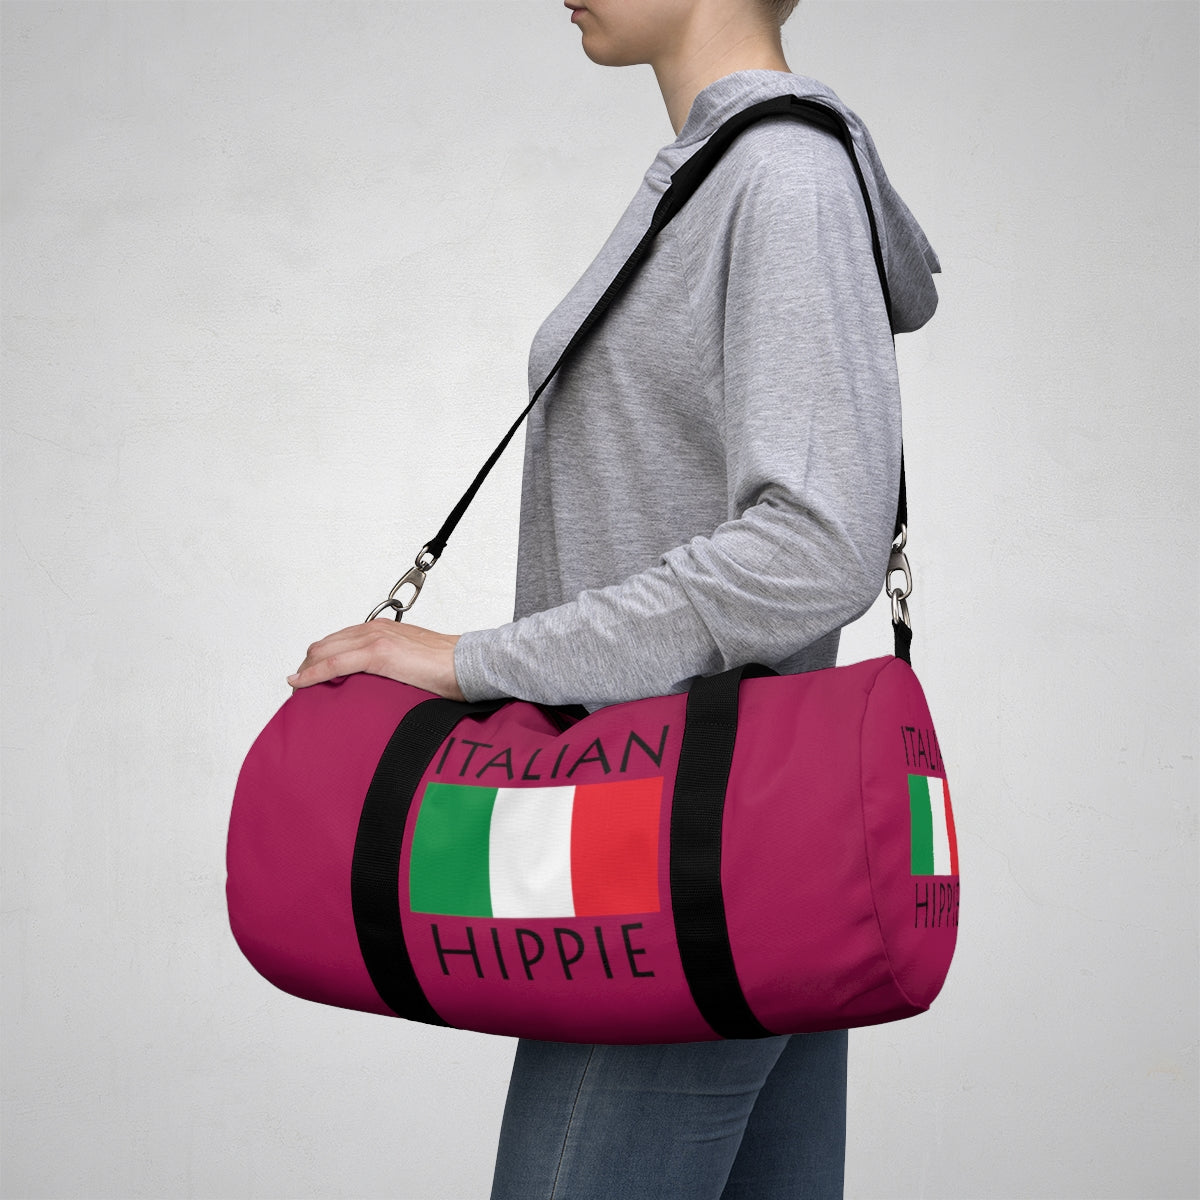  Stately Wear's Italian Flag Hippie duffel bag is colorful, iconic and stylish. We are a Katie Couric Shop partner. This duffel bag is the perfect accessory as a beach bag, ski bag, travel bag, shopping bag & gym bag, Pilates bag or yoga bag. Custom made one-at-a-time with environmentally friendly biodegradable inks & dyes. 2 sizes to choose. Stately Wear's bags are very durable, soft and colorful duffels with durable straps.